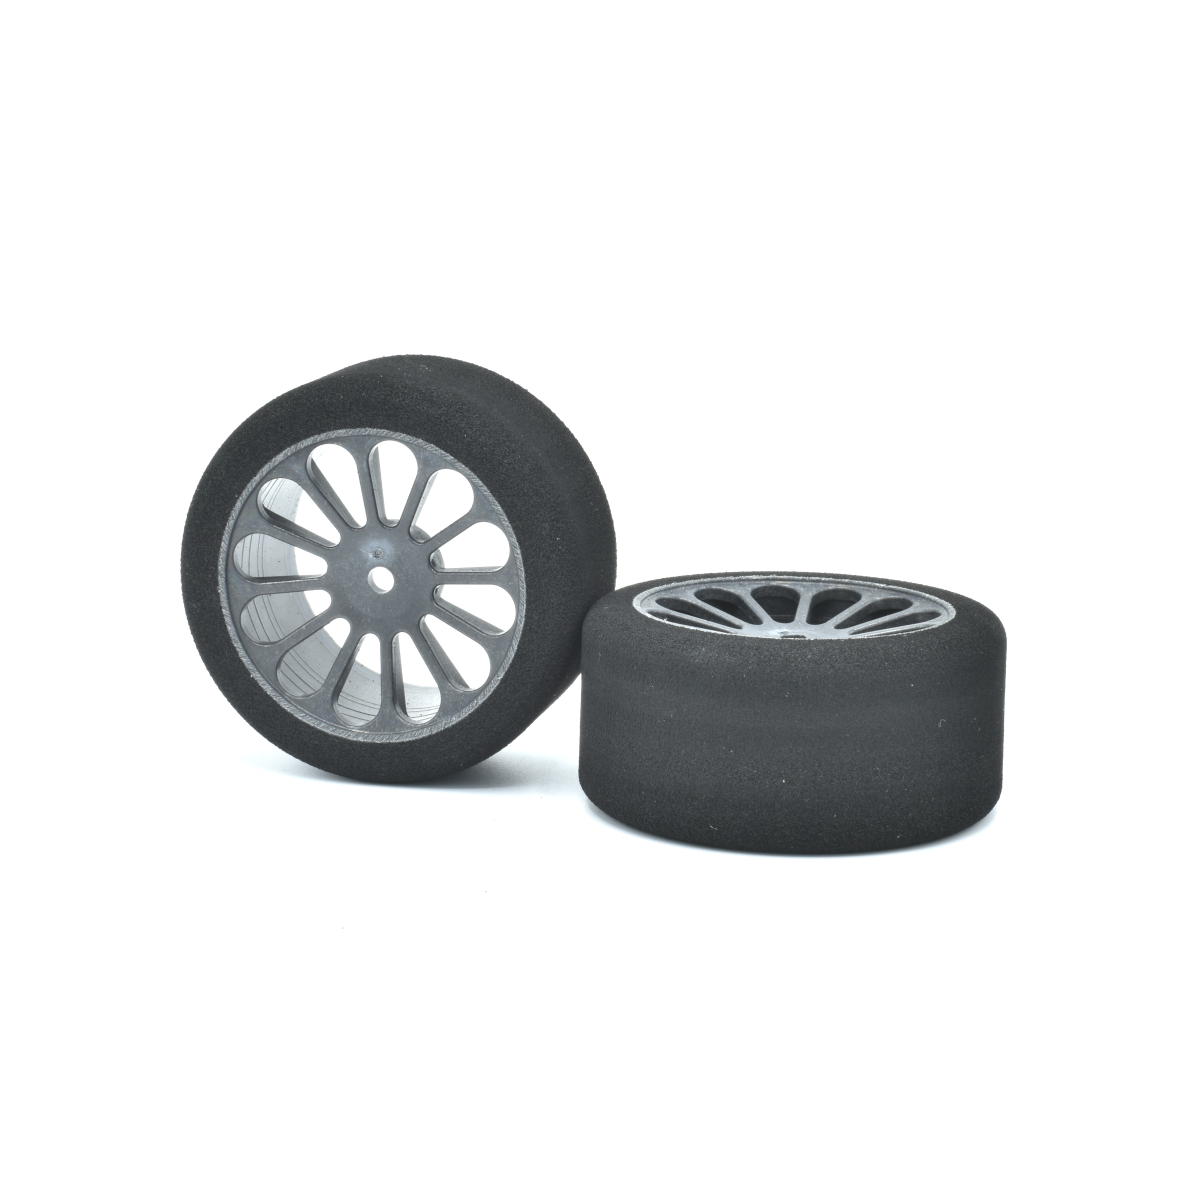 1/10 200mm TOURING TIRES